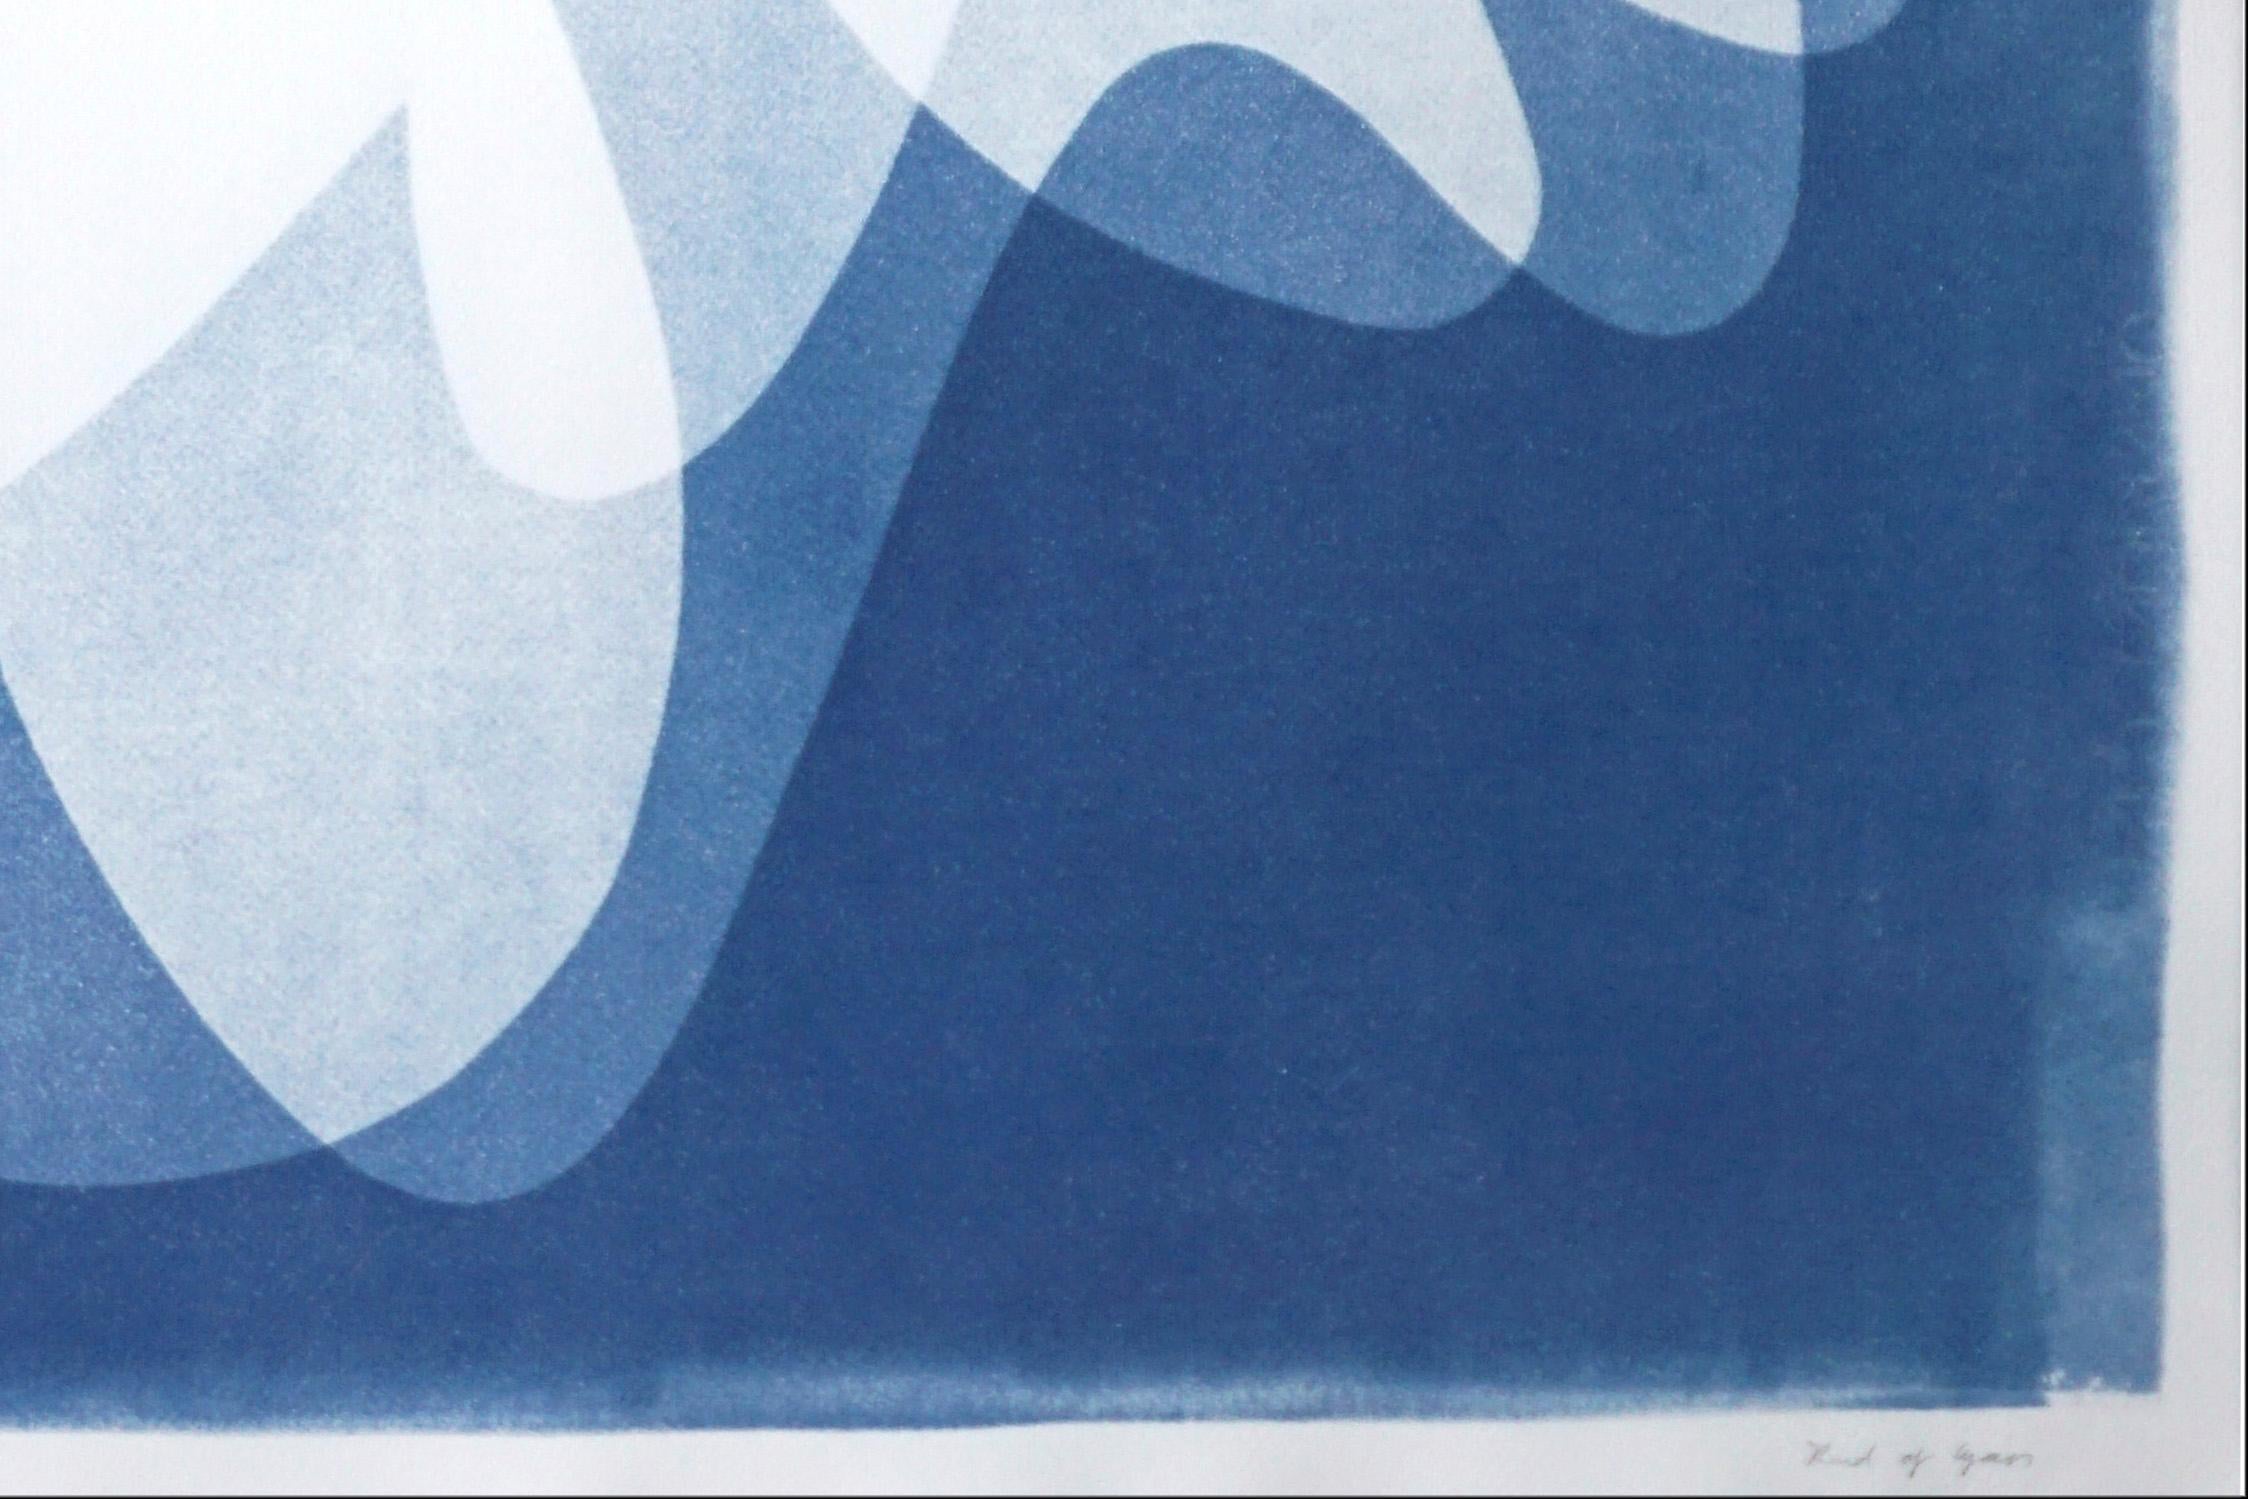 This is an exclusive handprinted unique cyanotype that takes its inspiration from the mid-century modern shapes.
It's made by layering paper cutouts and different exposures using uv-light. 

Details:
+ Title: Blue Abstract Tulips 
+ Year: 2022
+